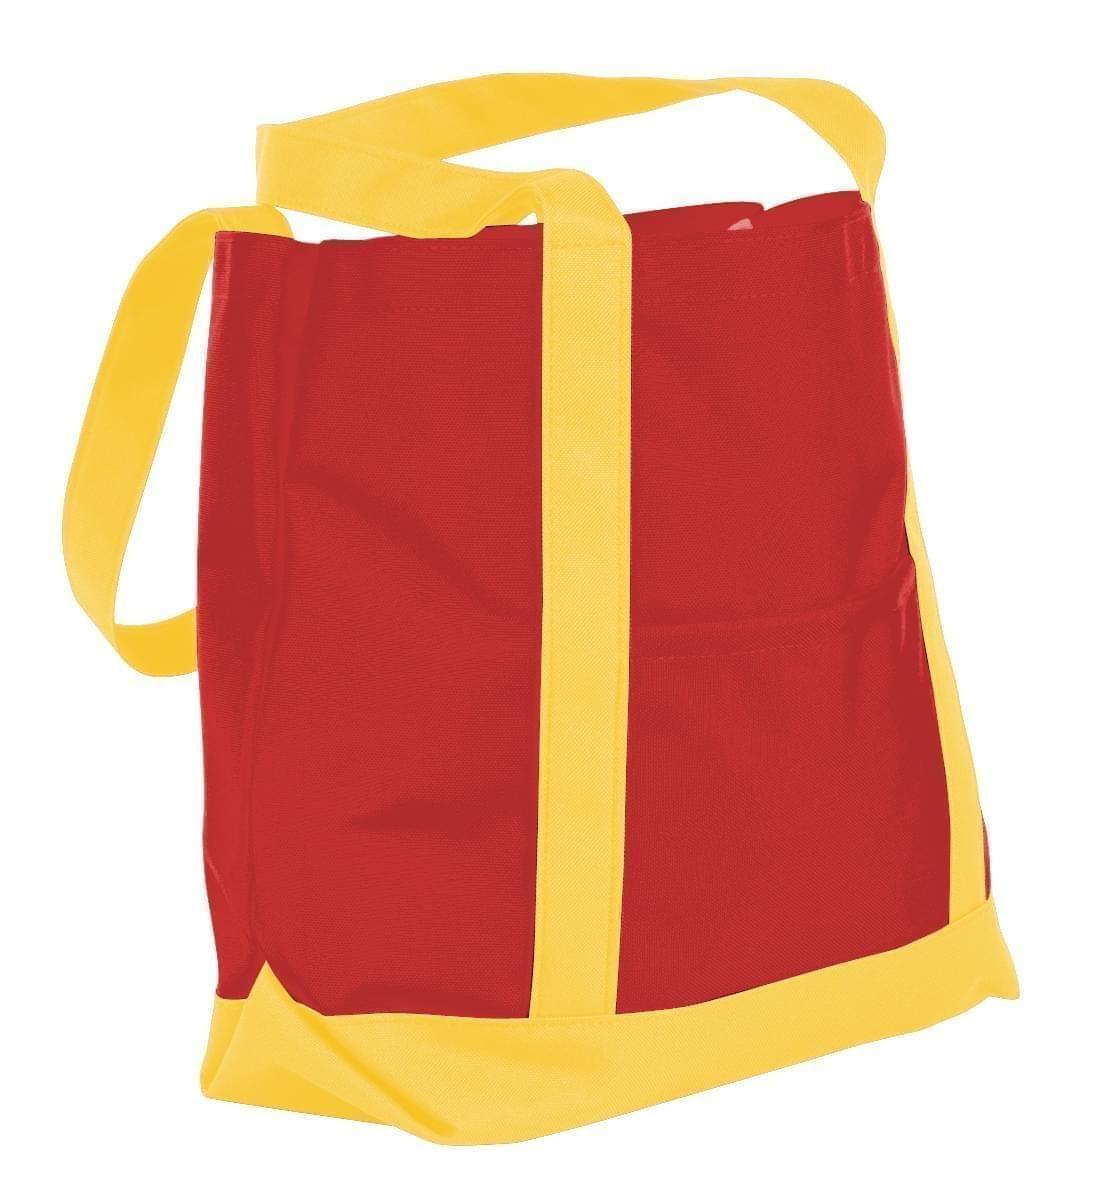 USA Made Nylon Poly Boat Tote Bags, Red-Gold, XAACL1UAZQ